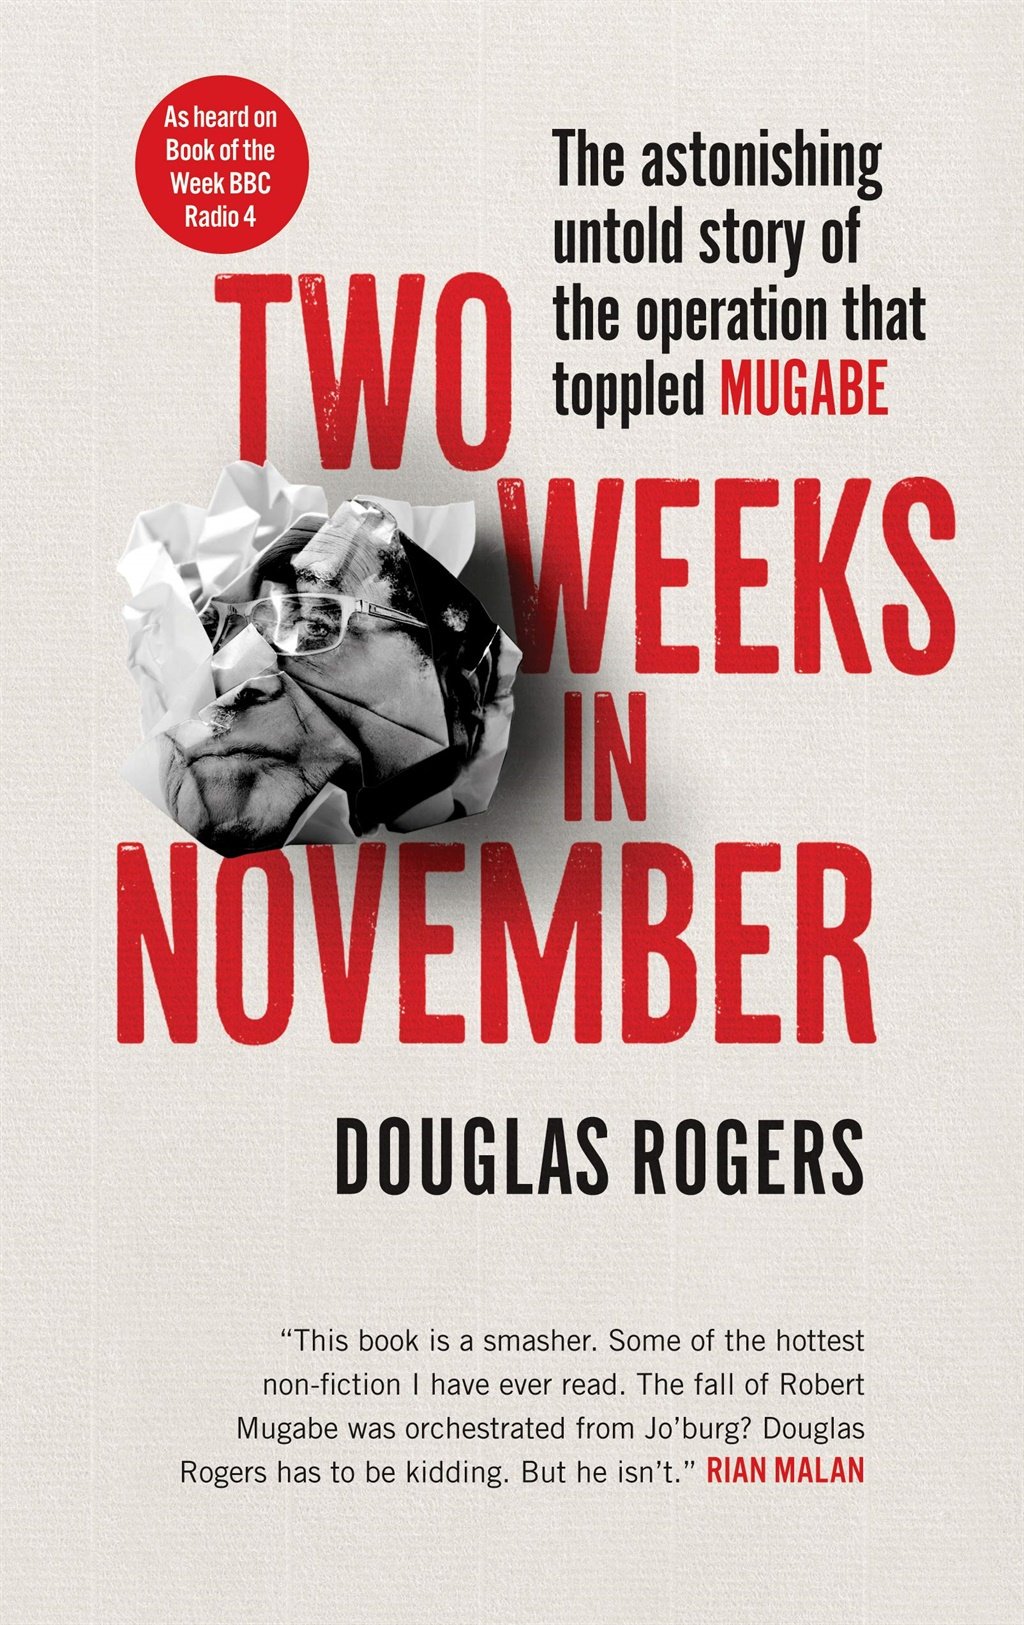 Two weeks in November by Douglas Rogers published by Jonathan Ball Publishers.